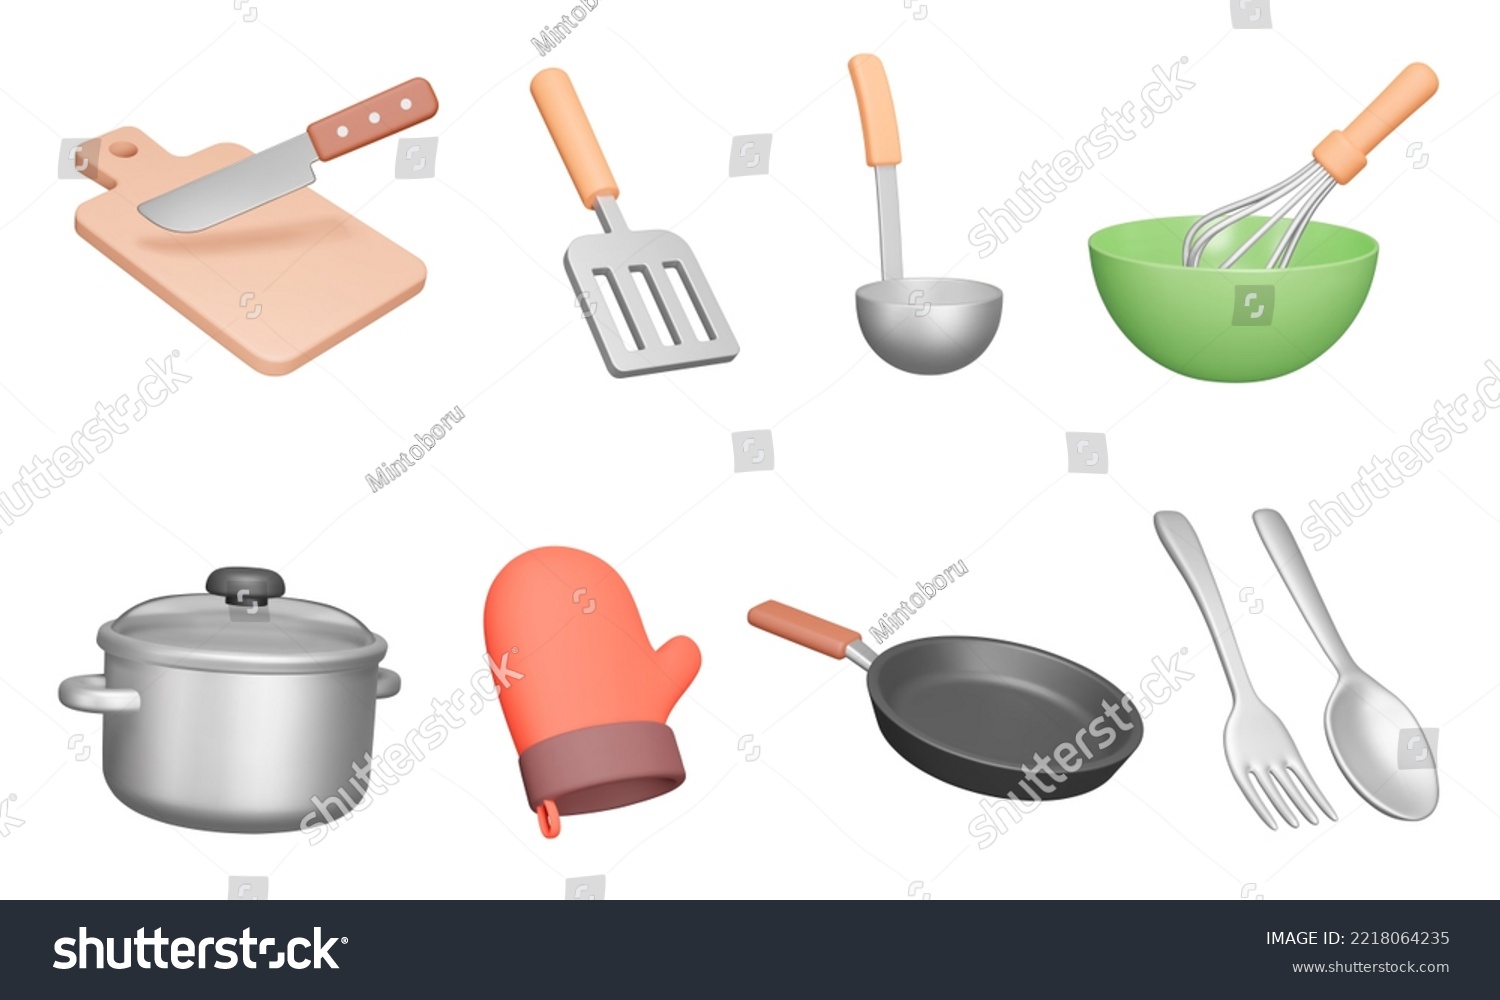 Kitchenware 3d icon set. Kitchen utensils for cooking. Isolated icons, Cutting board, knife, spatula, ladle, whisk, bowl, saucepan, tack, pan, fork, spoon. Cutlery. Objects on transparent background #2218064235